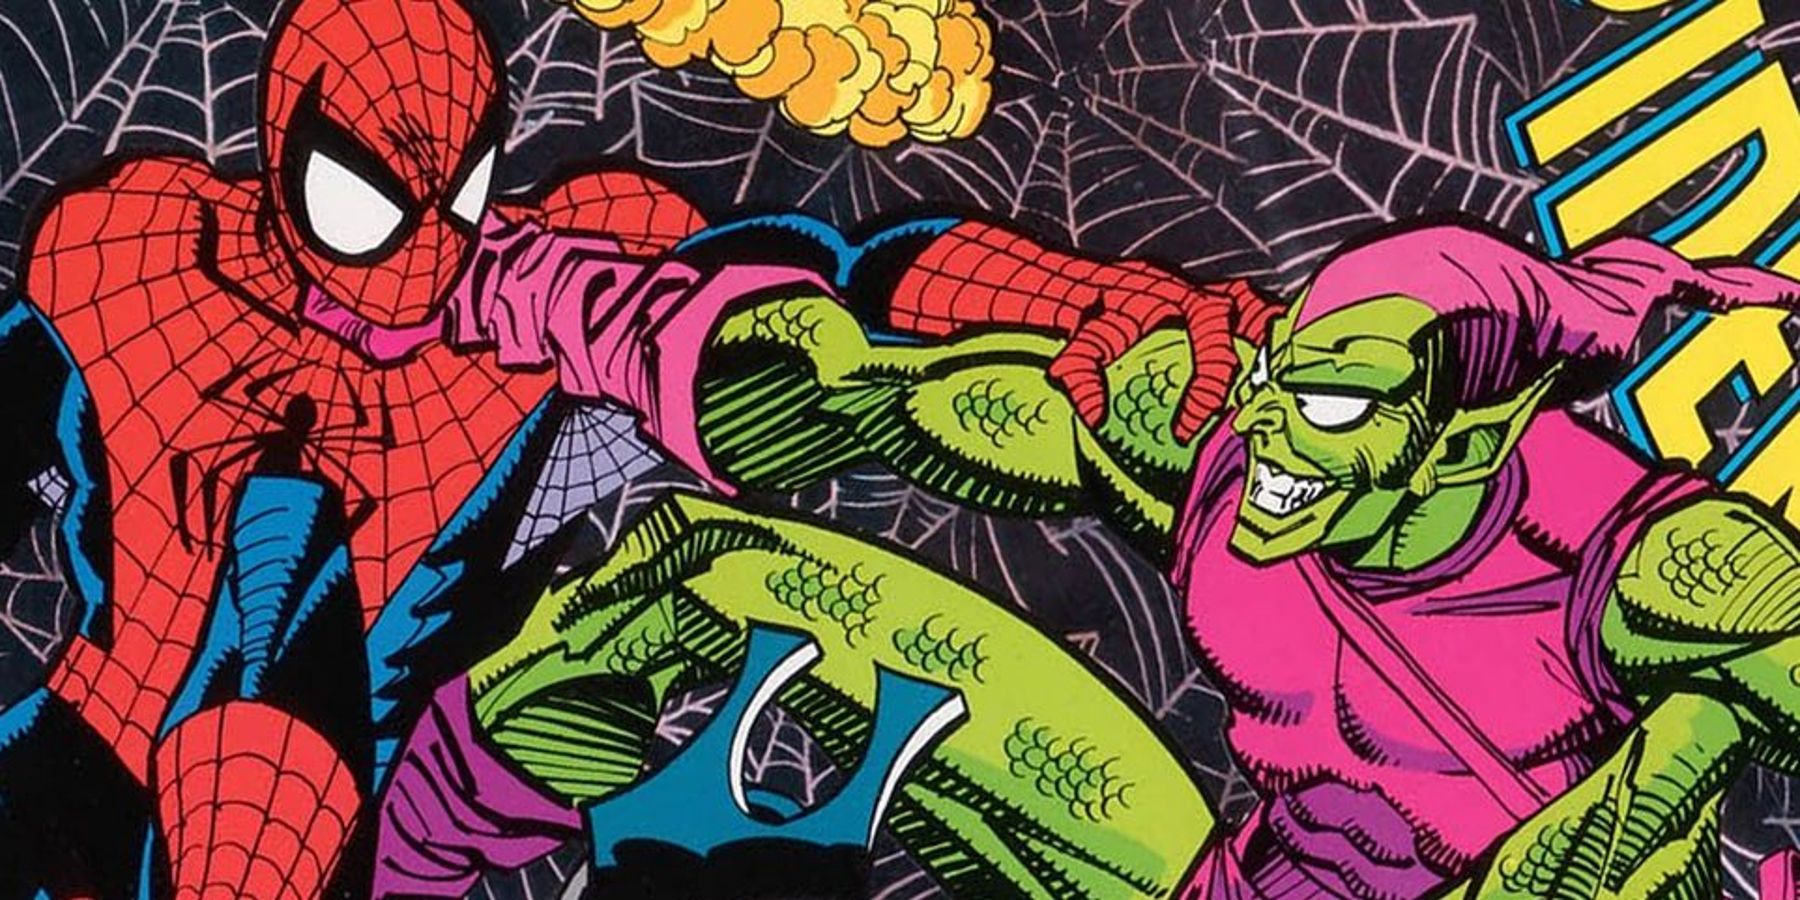 Spider Man fighting Harry Osborn as the Green Goblin in the Amazing Spider Man comics